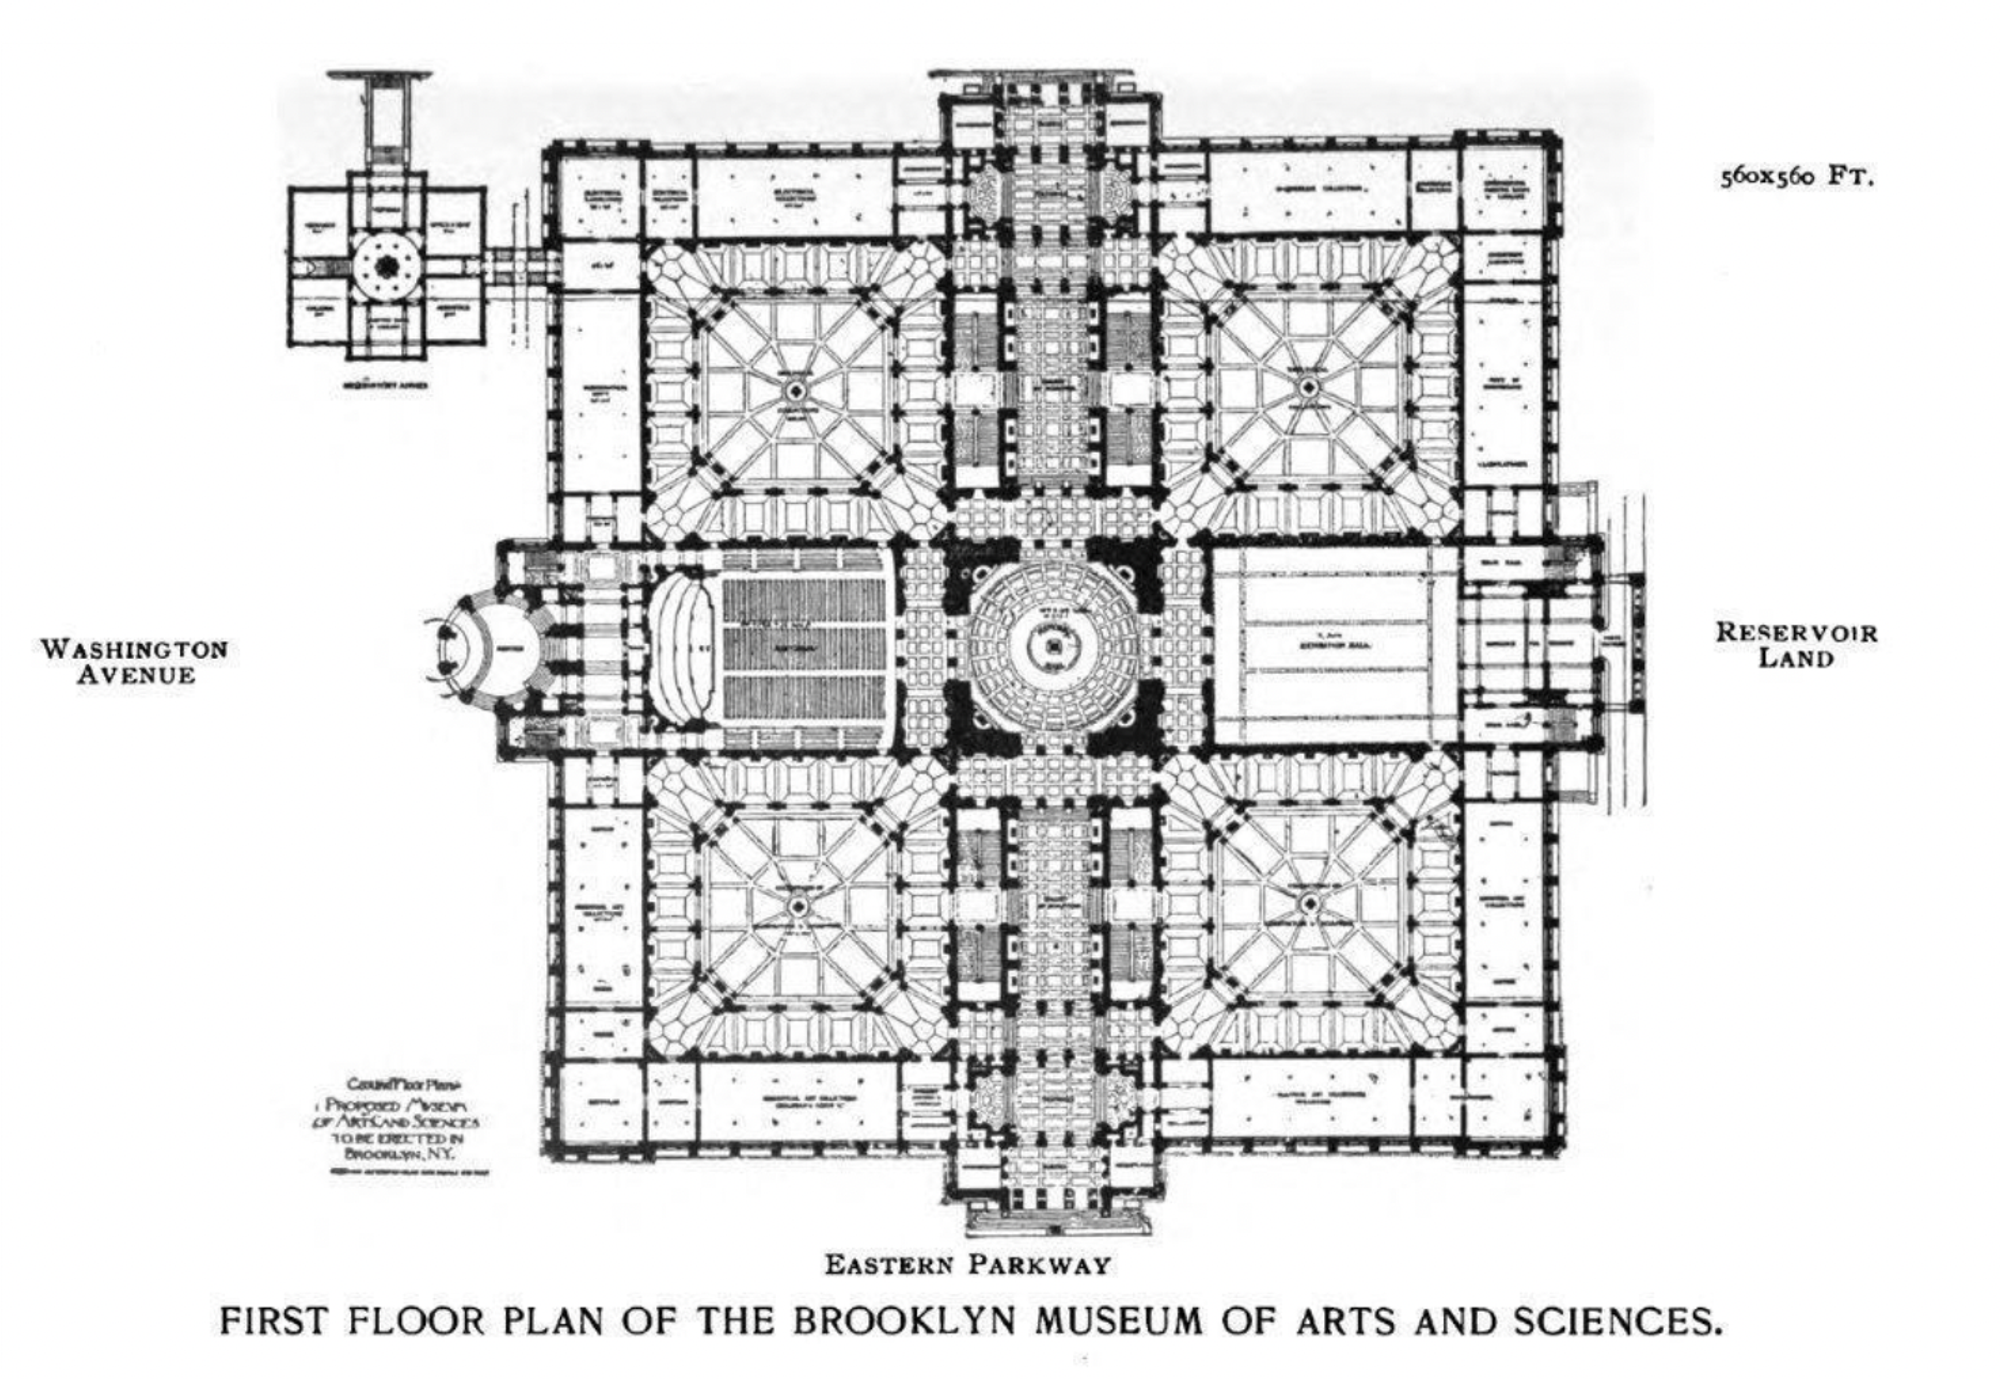 The Brooklyn Museum's floor plan, which originally included an observatory in the top left corner.